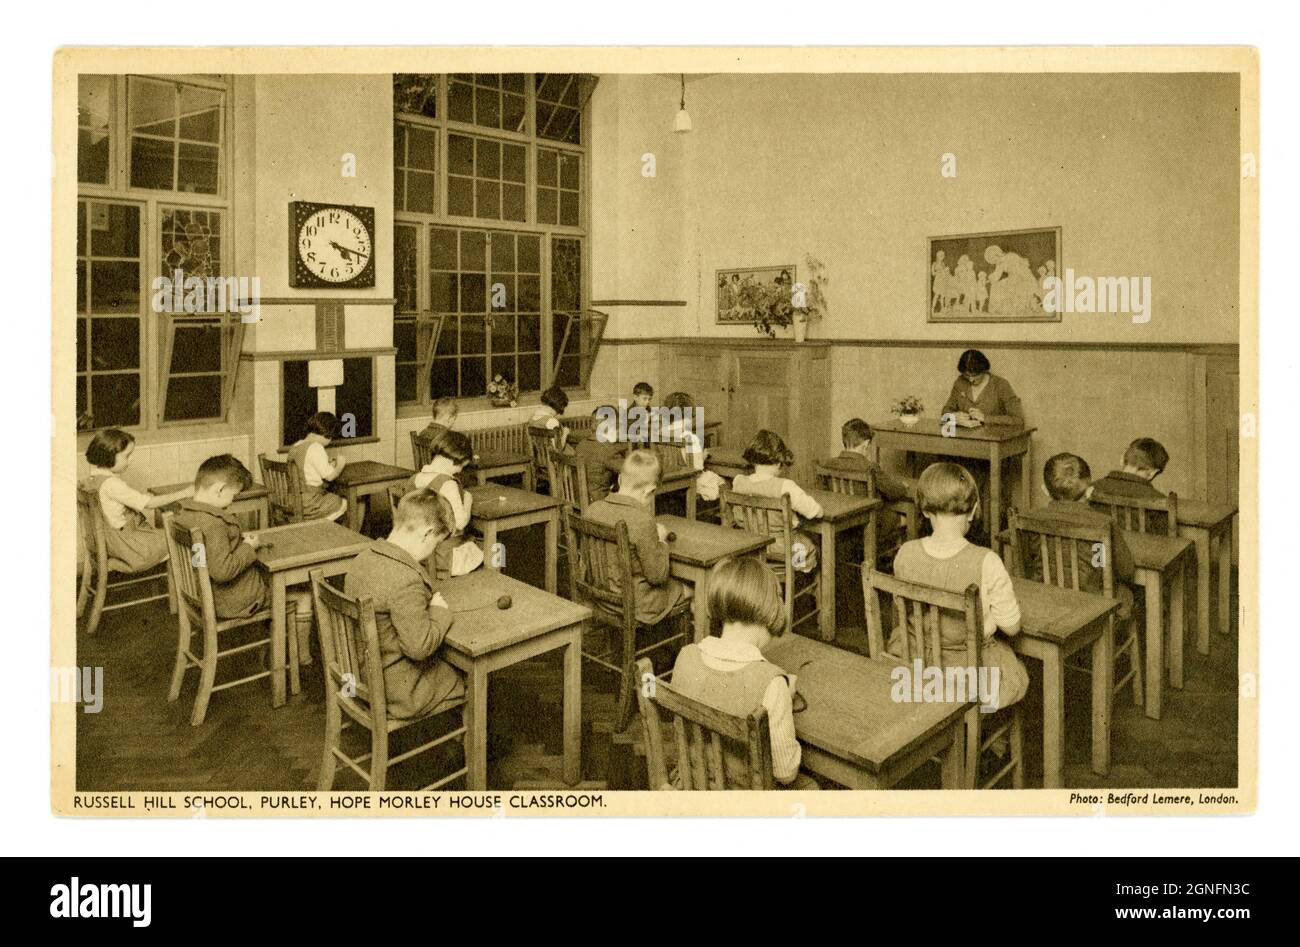 1930's era by Bedford Lemere & Co.  postcard of primary school children, sitting at desks with knitting wool, with teacher, Hope Morley House Classroom, large clock on the wall, Russell Hill School - a boarding school,  Purley, London, England, U.K. Stock Photo